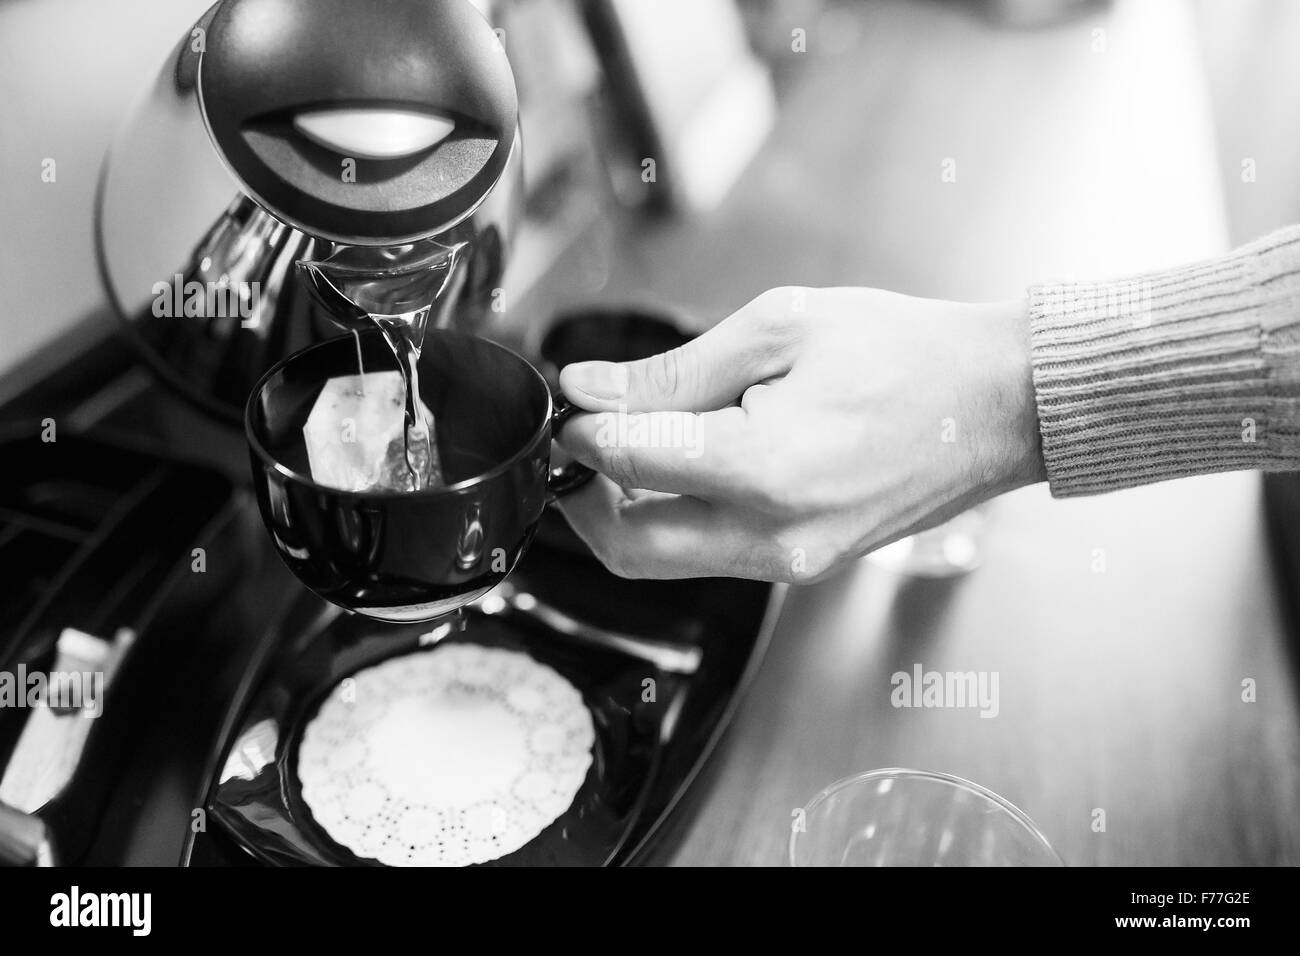 A man pours tea from a kettle into a mug in the kitchen. Stock Photo